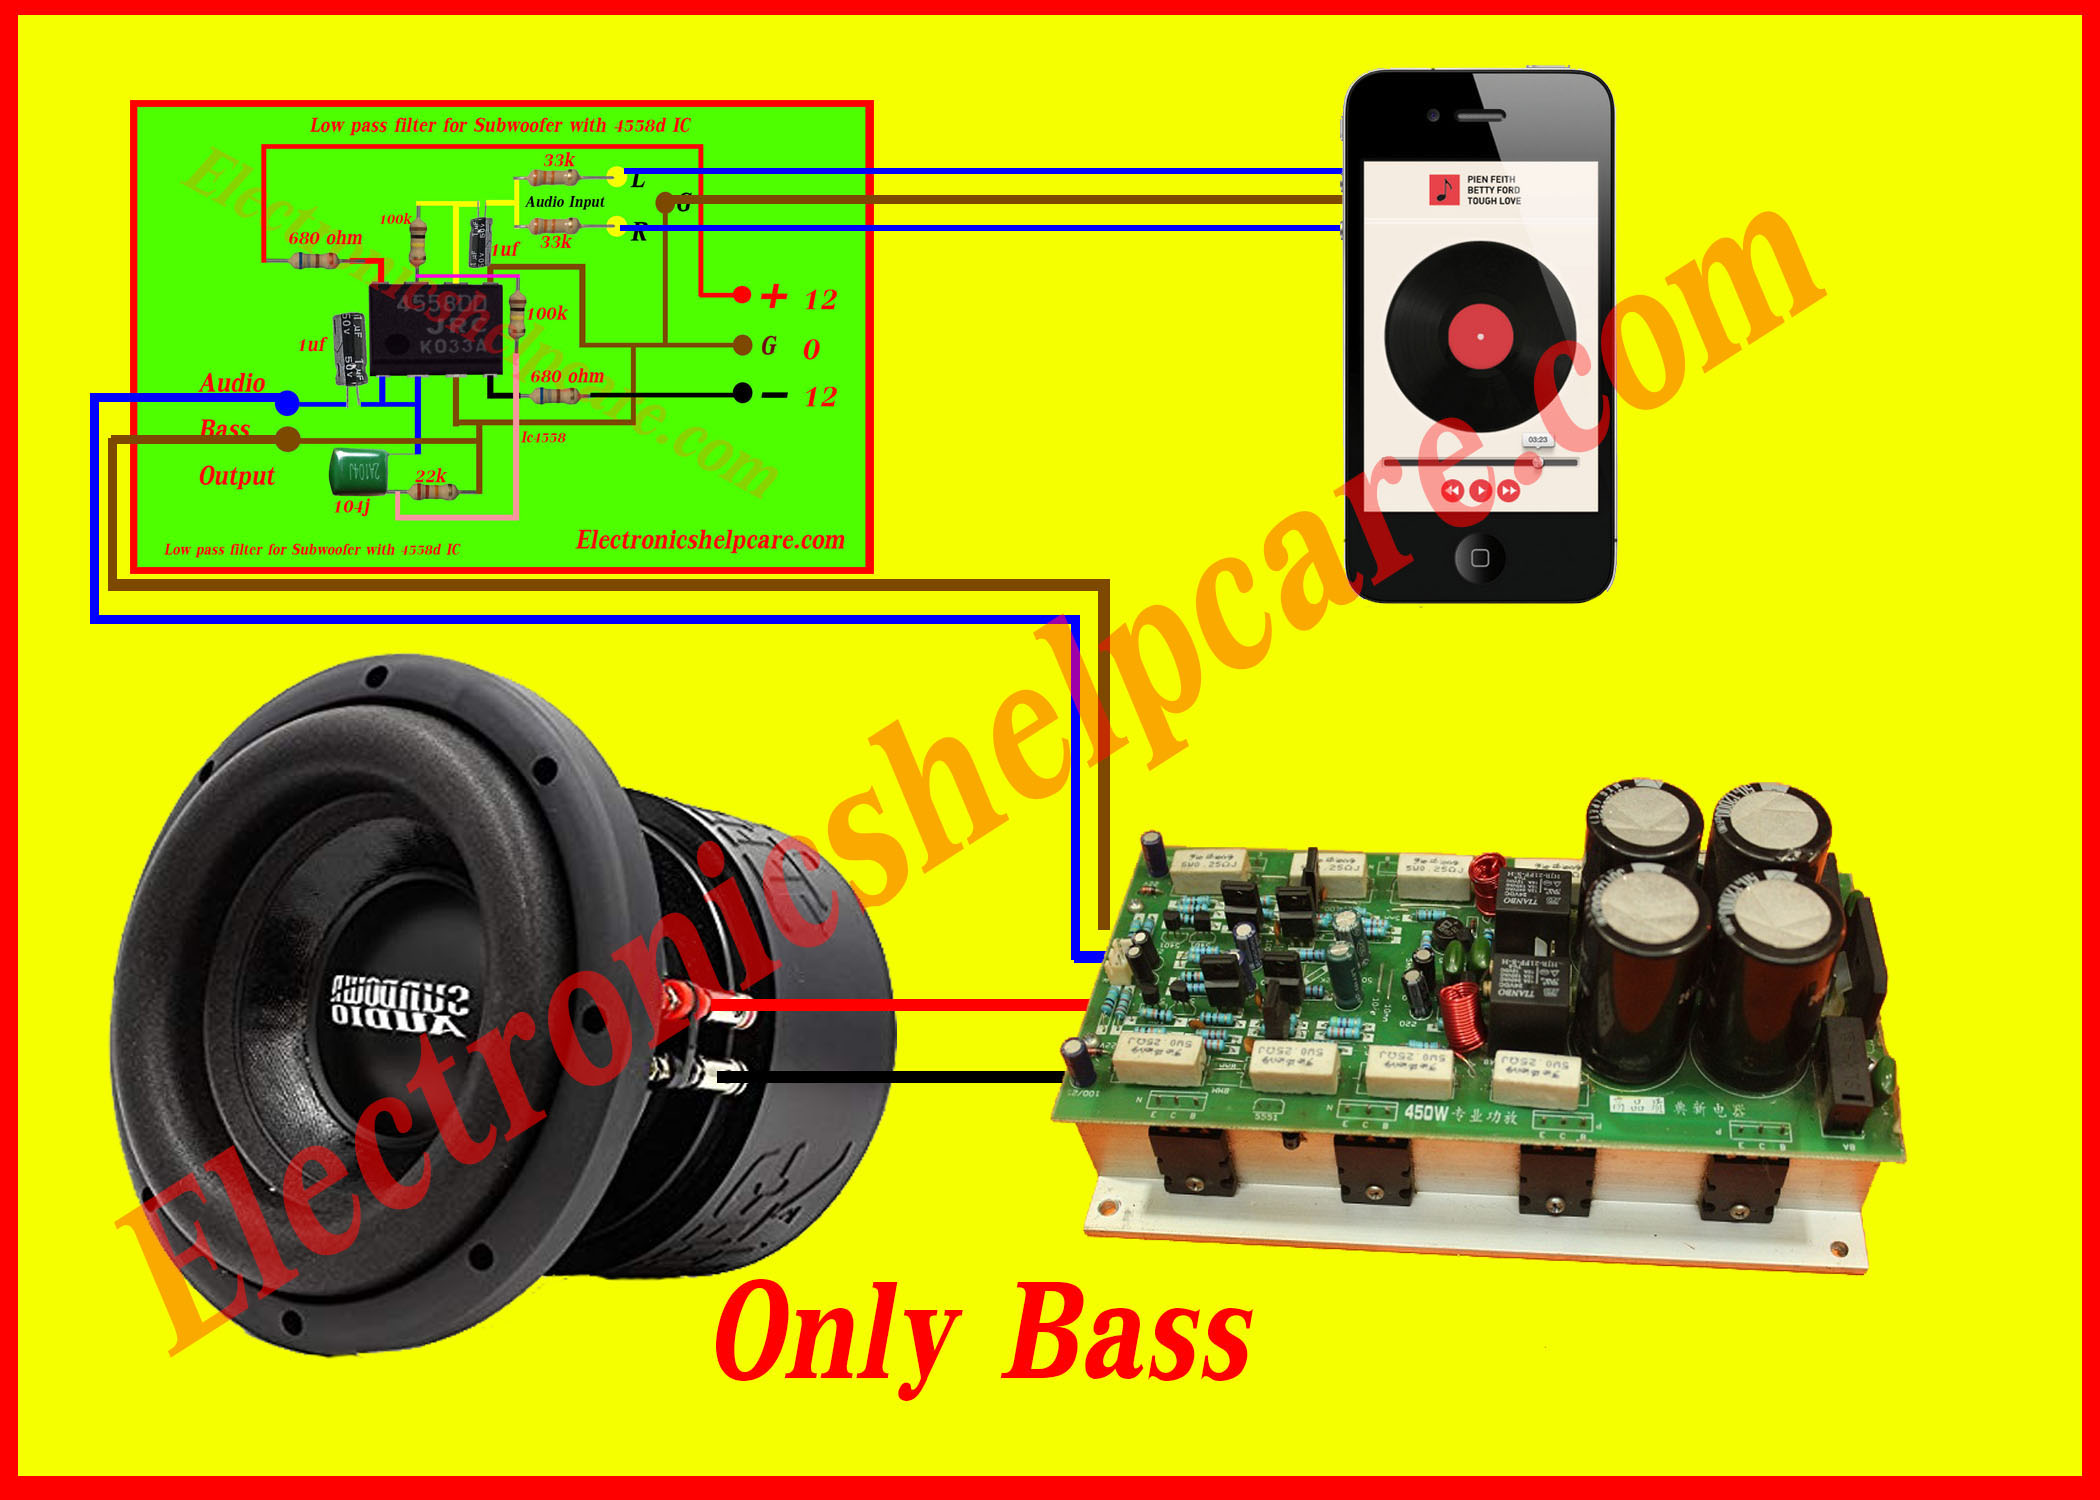 Low pass filter for Subwoofer with 4558d IC